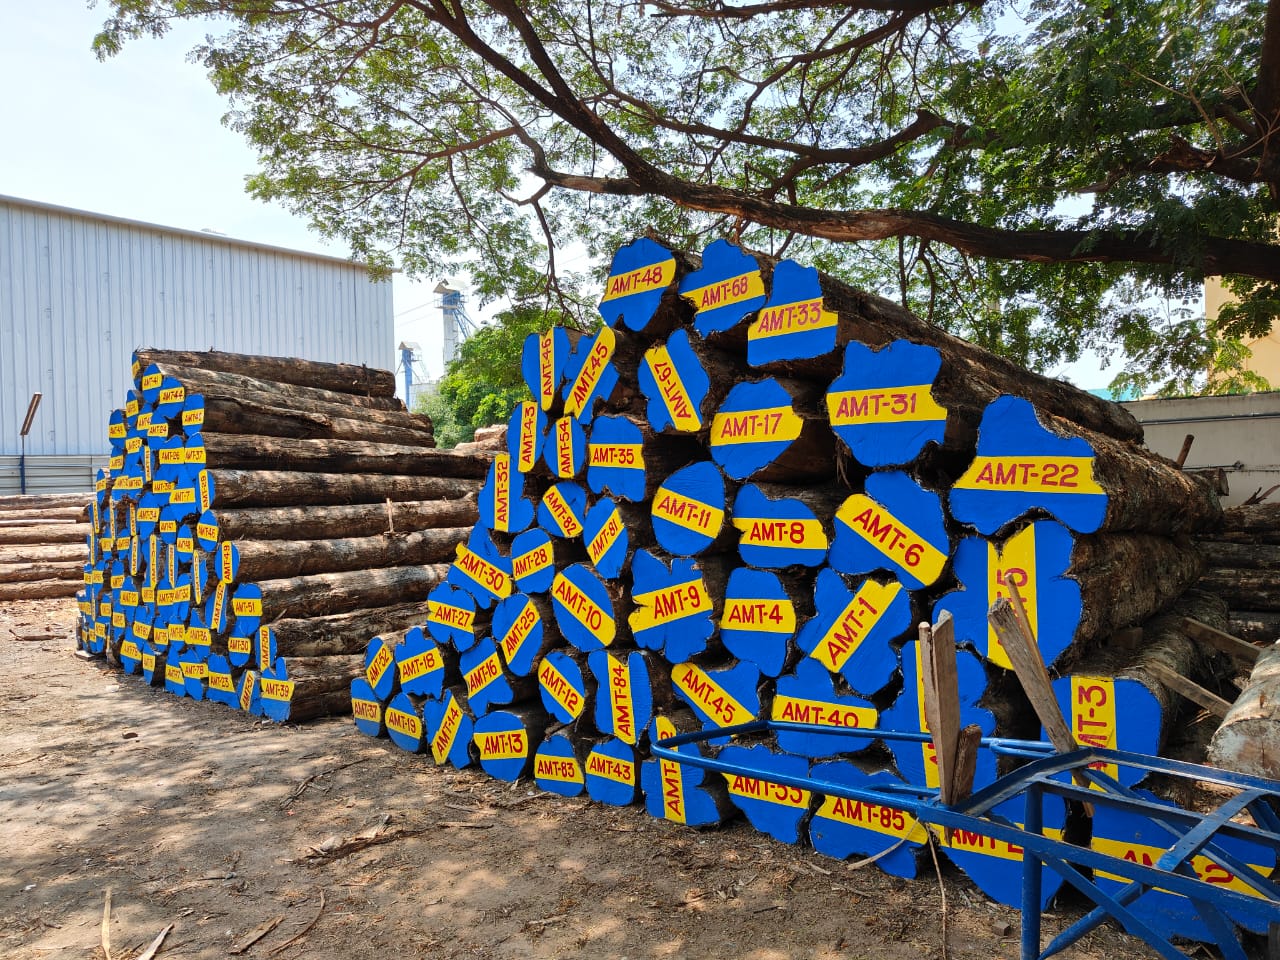 al-madina timbers in trichy